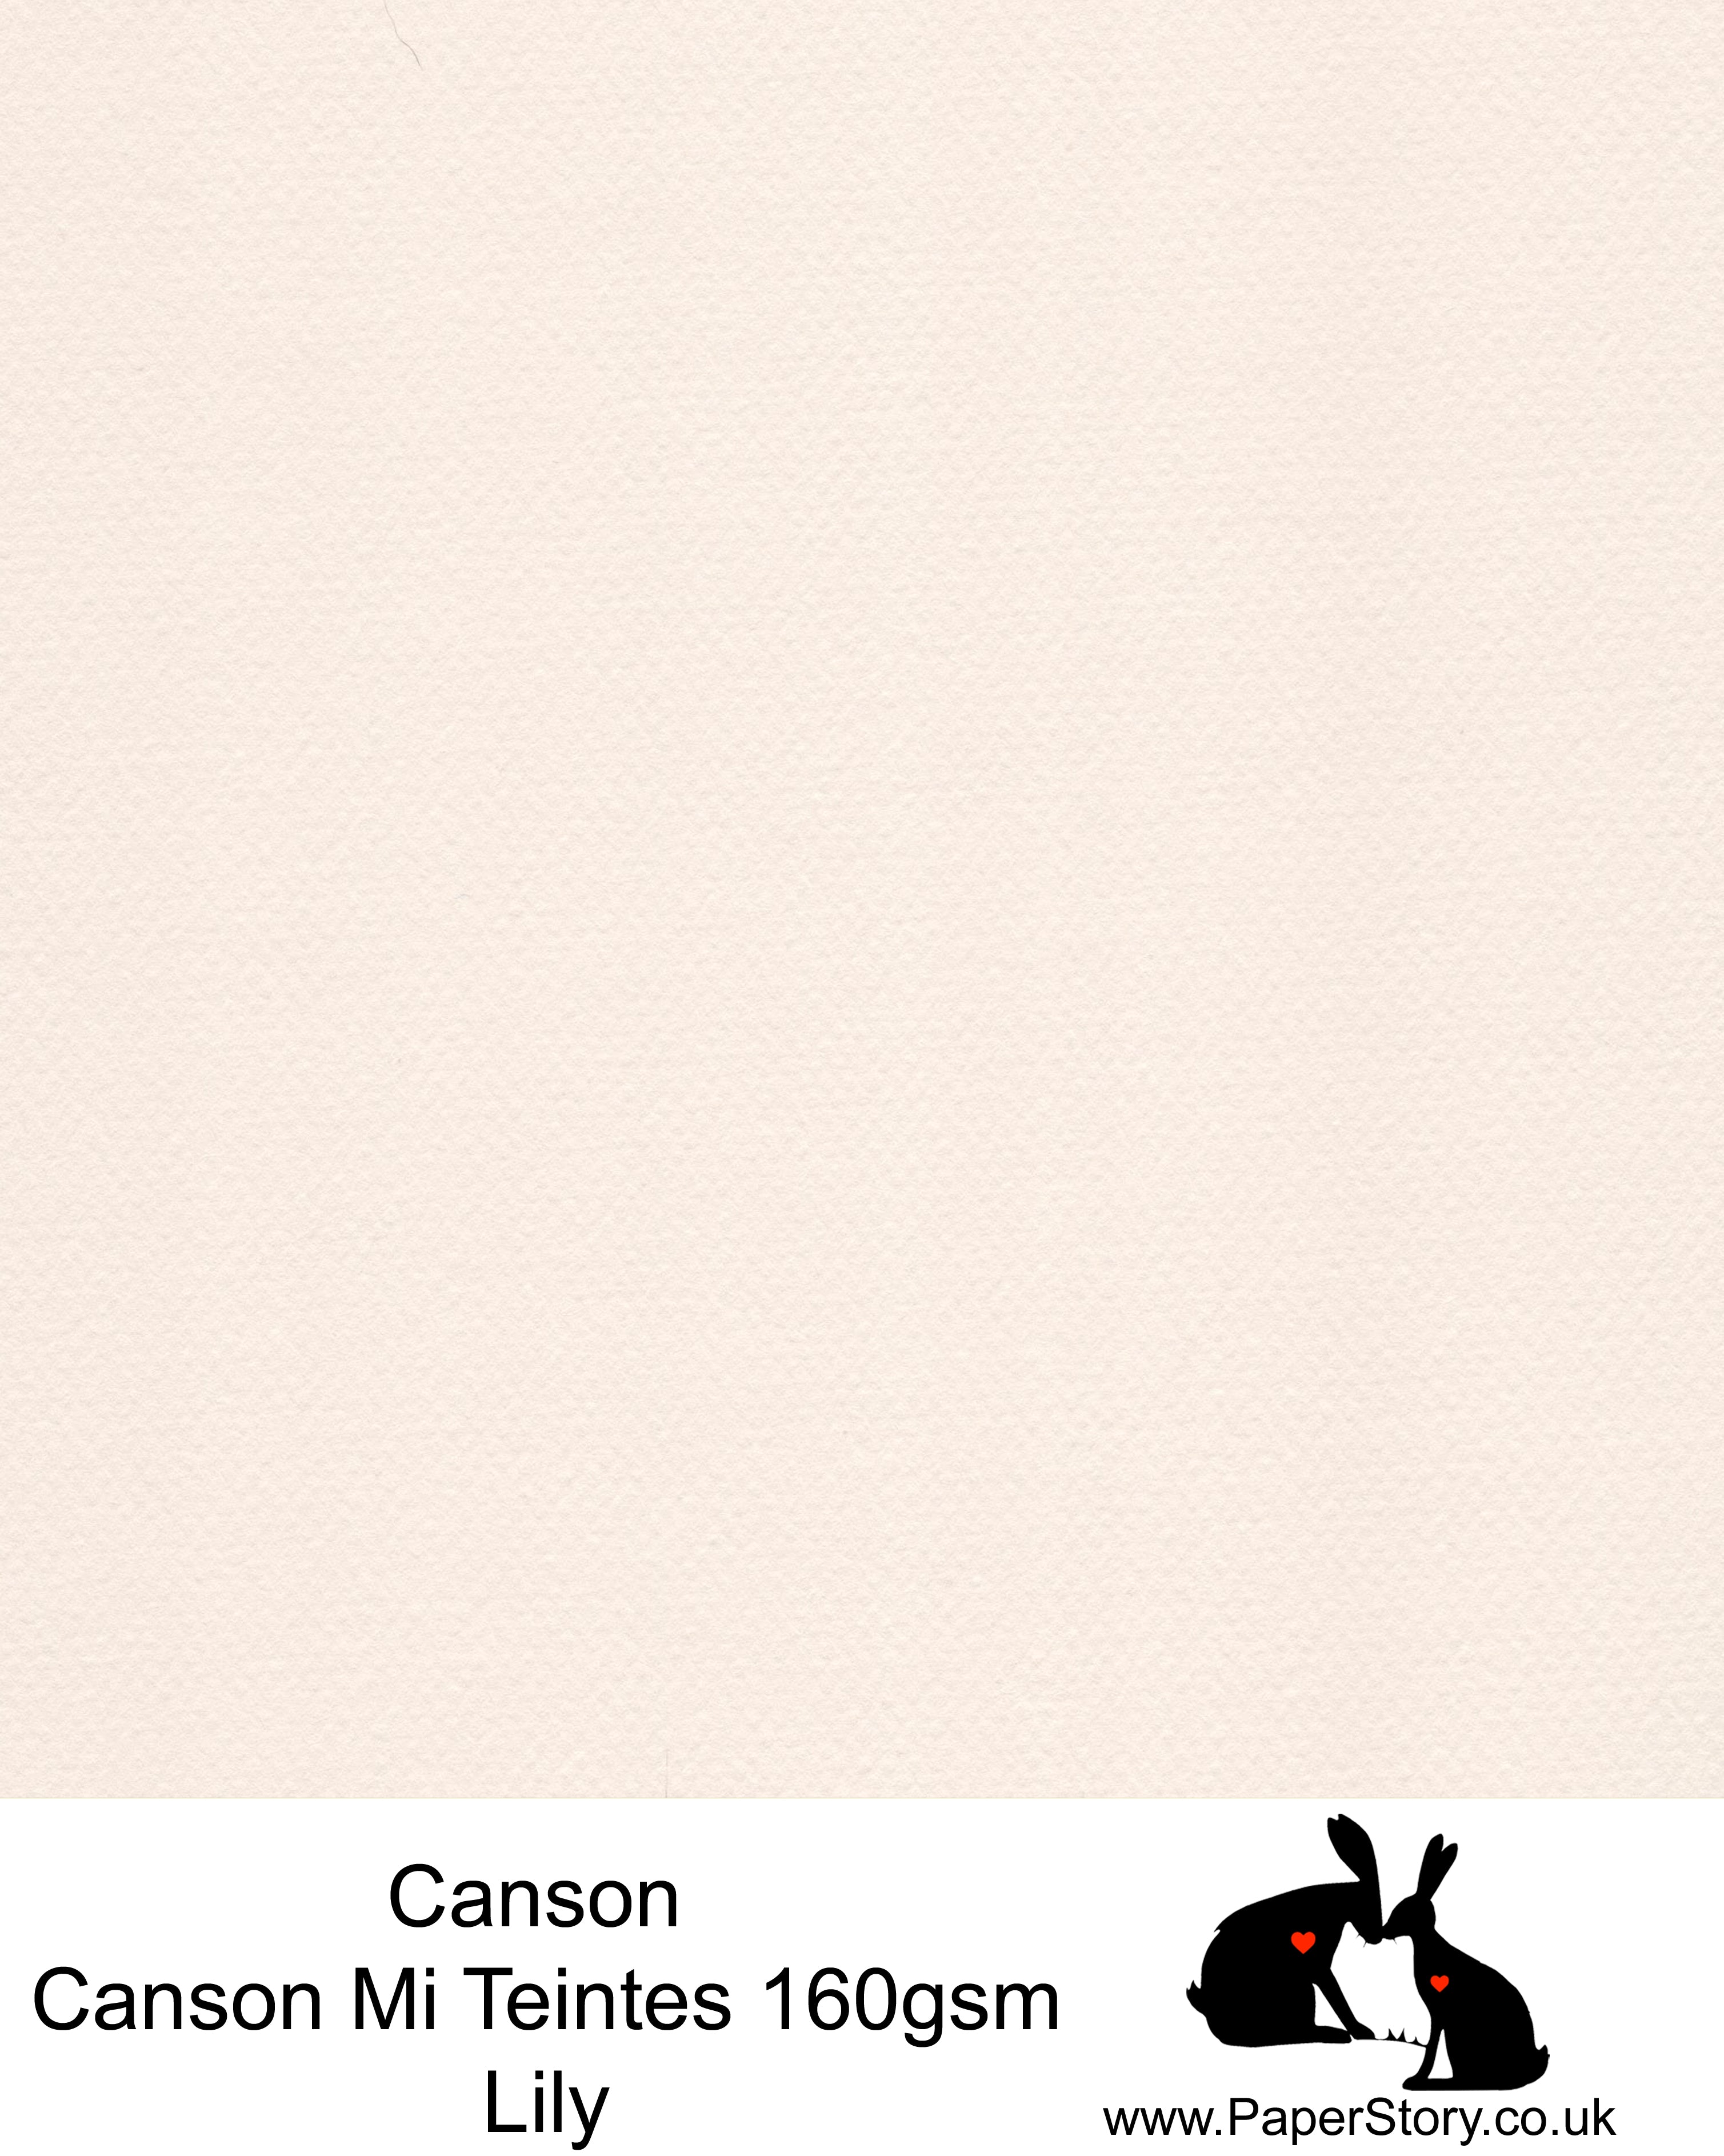 Canson Mi Teintes acid free, Lily, palest pink, hammered texture honeycomb surface paper 160 gsm. This is a popular and classic paper for all artists especially well respected for Pastel  and Papercutting made famous by Paper Panda. This paper has a honeycombed finish one side and fine grain the other. An authentic art paper, acid free with a  very high 50% cotton content. Canson Mi-Teintes complies with the ISO 9706 standard on permanence, a guarantee of excellent conservation  